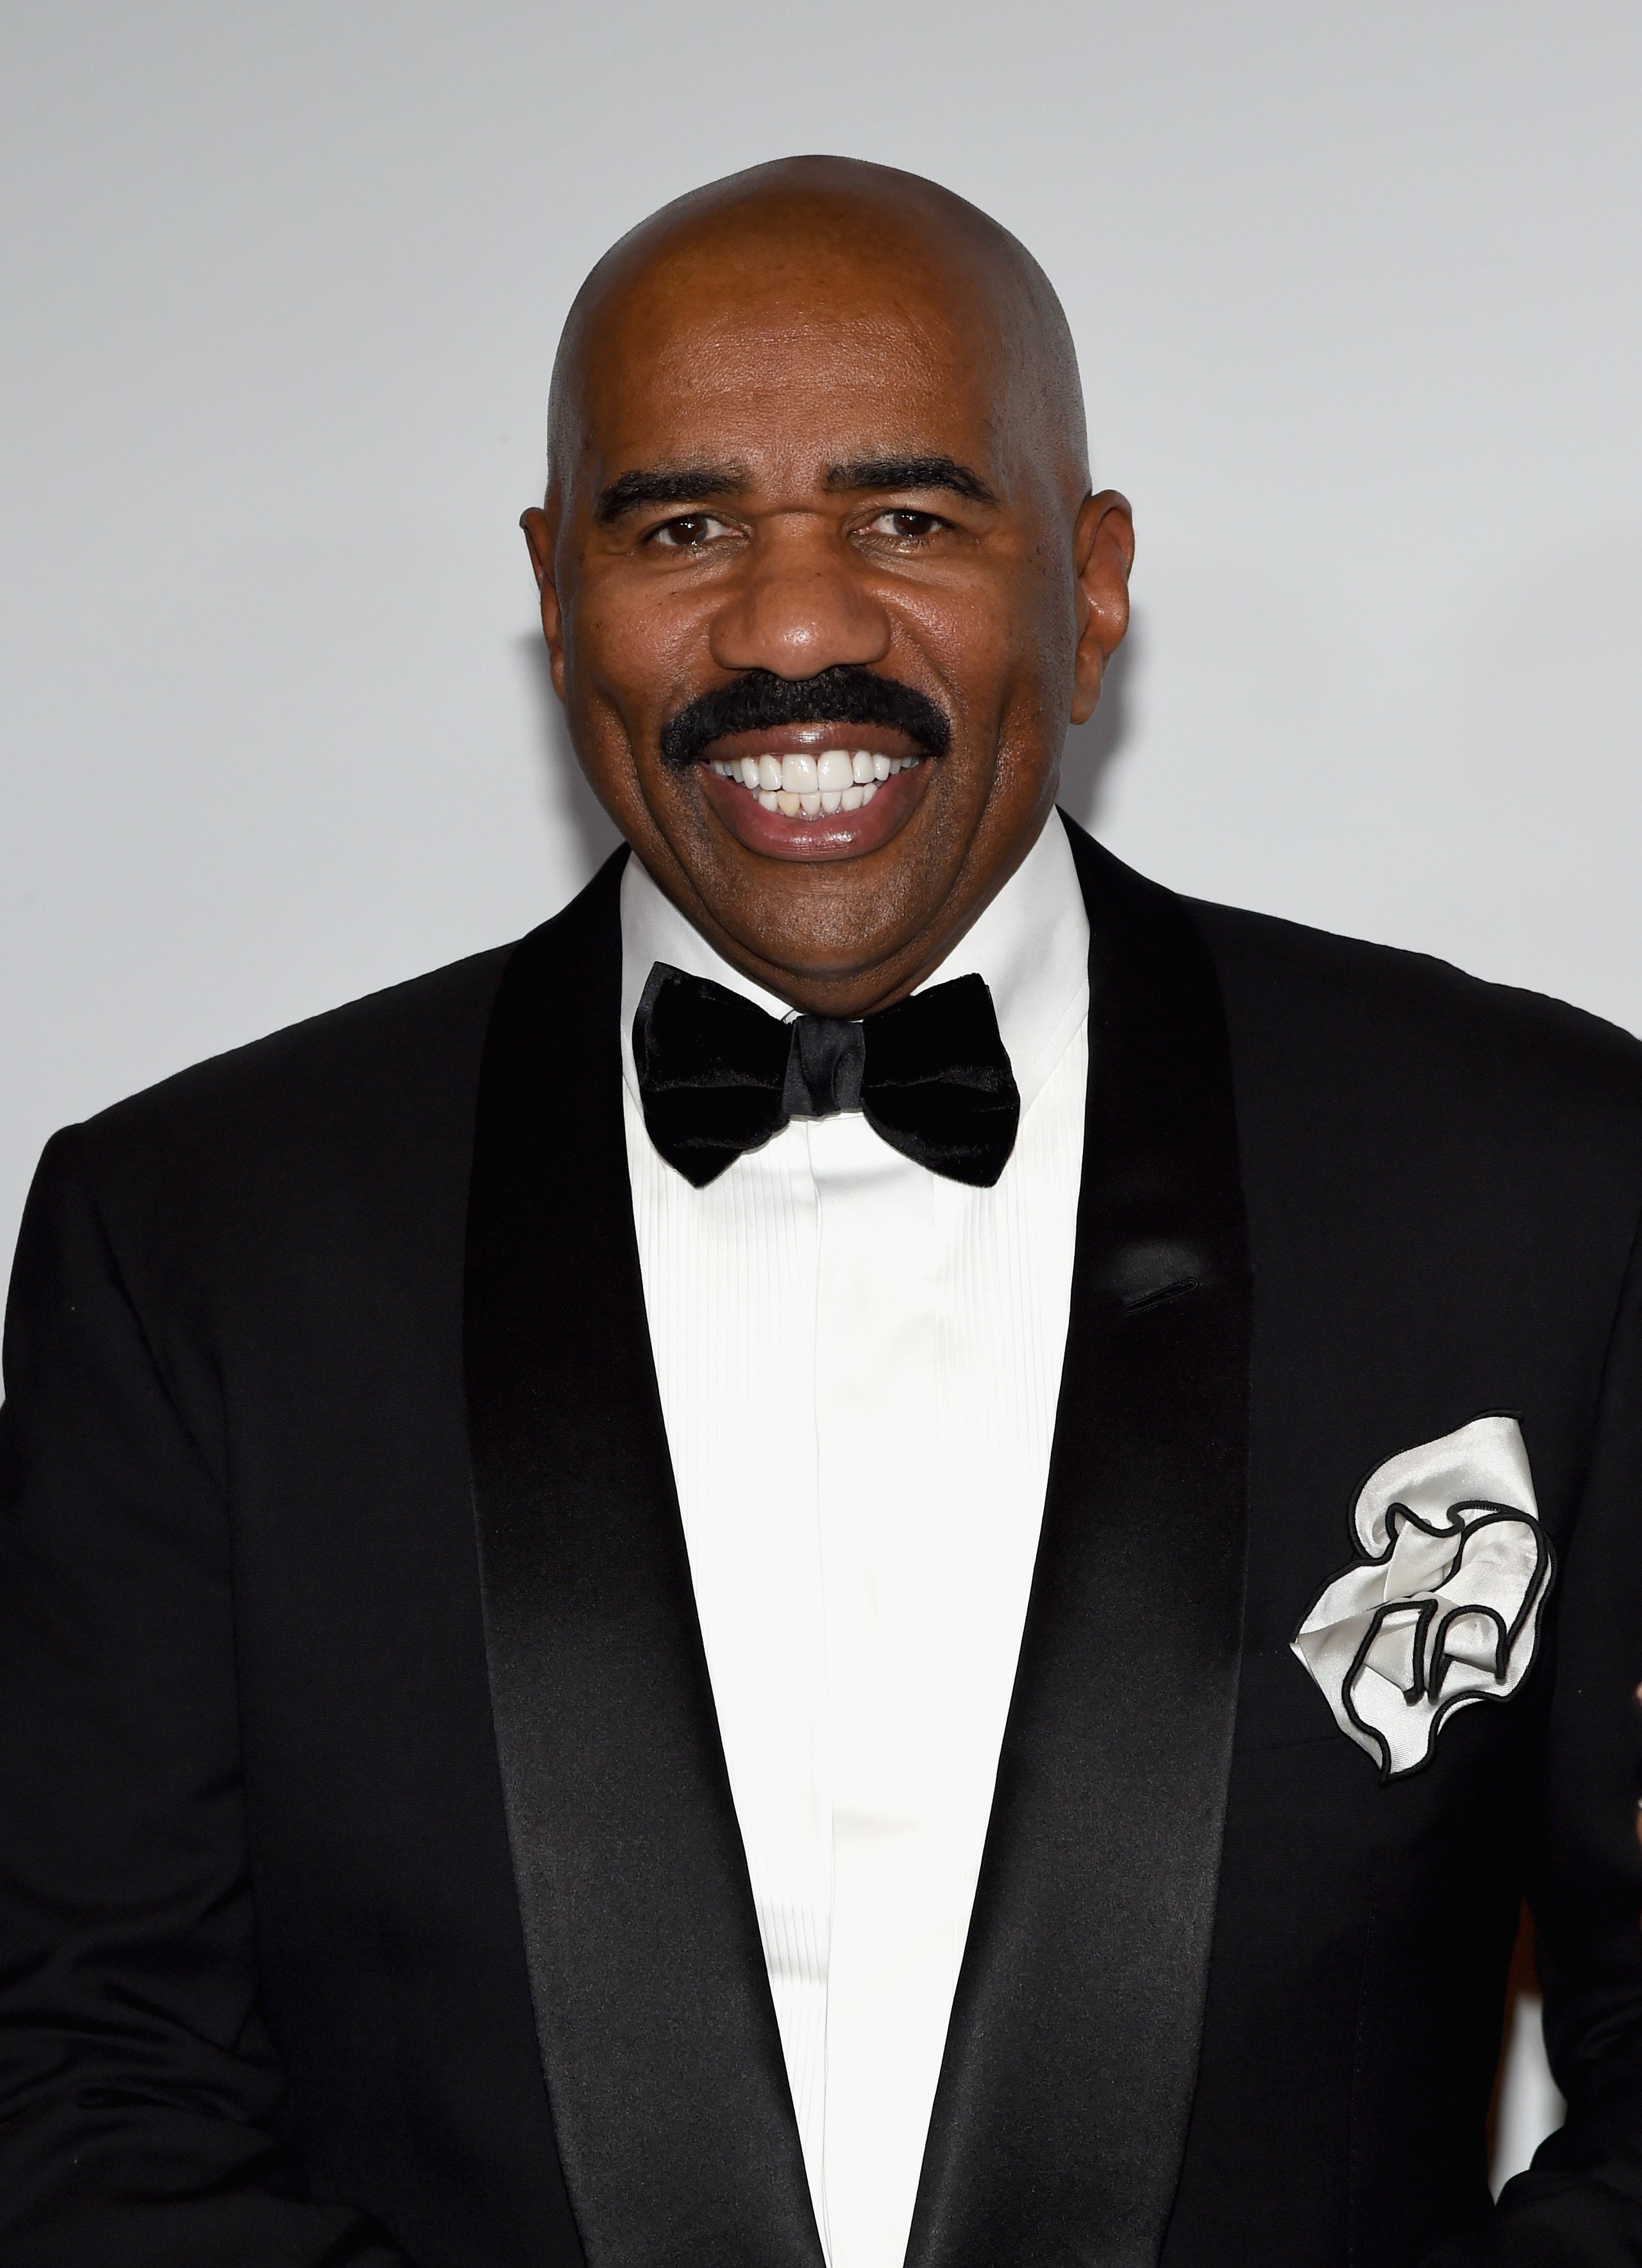 Steve Harvey attends the 2015 Miss Universe Pageant at Planet Hollywood Resort & Casino on December 20, 2015 in Las Vegas, Nevada. | Source: Getty Images